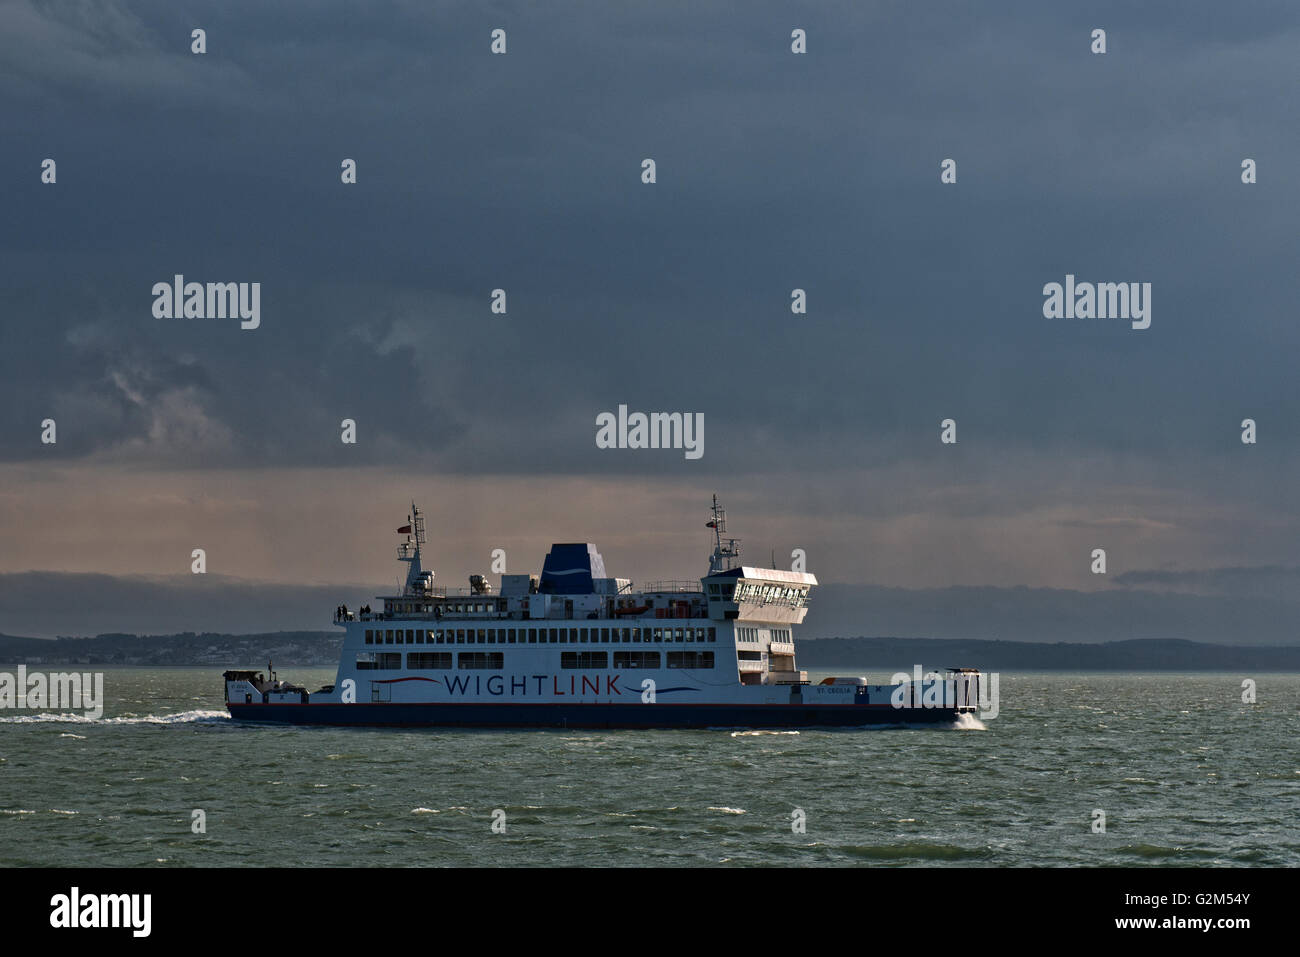 St Cecilia - Wightlink Ferry arriving at Portsmouth, Hampshire, UK Stock Photo